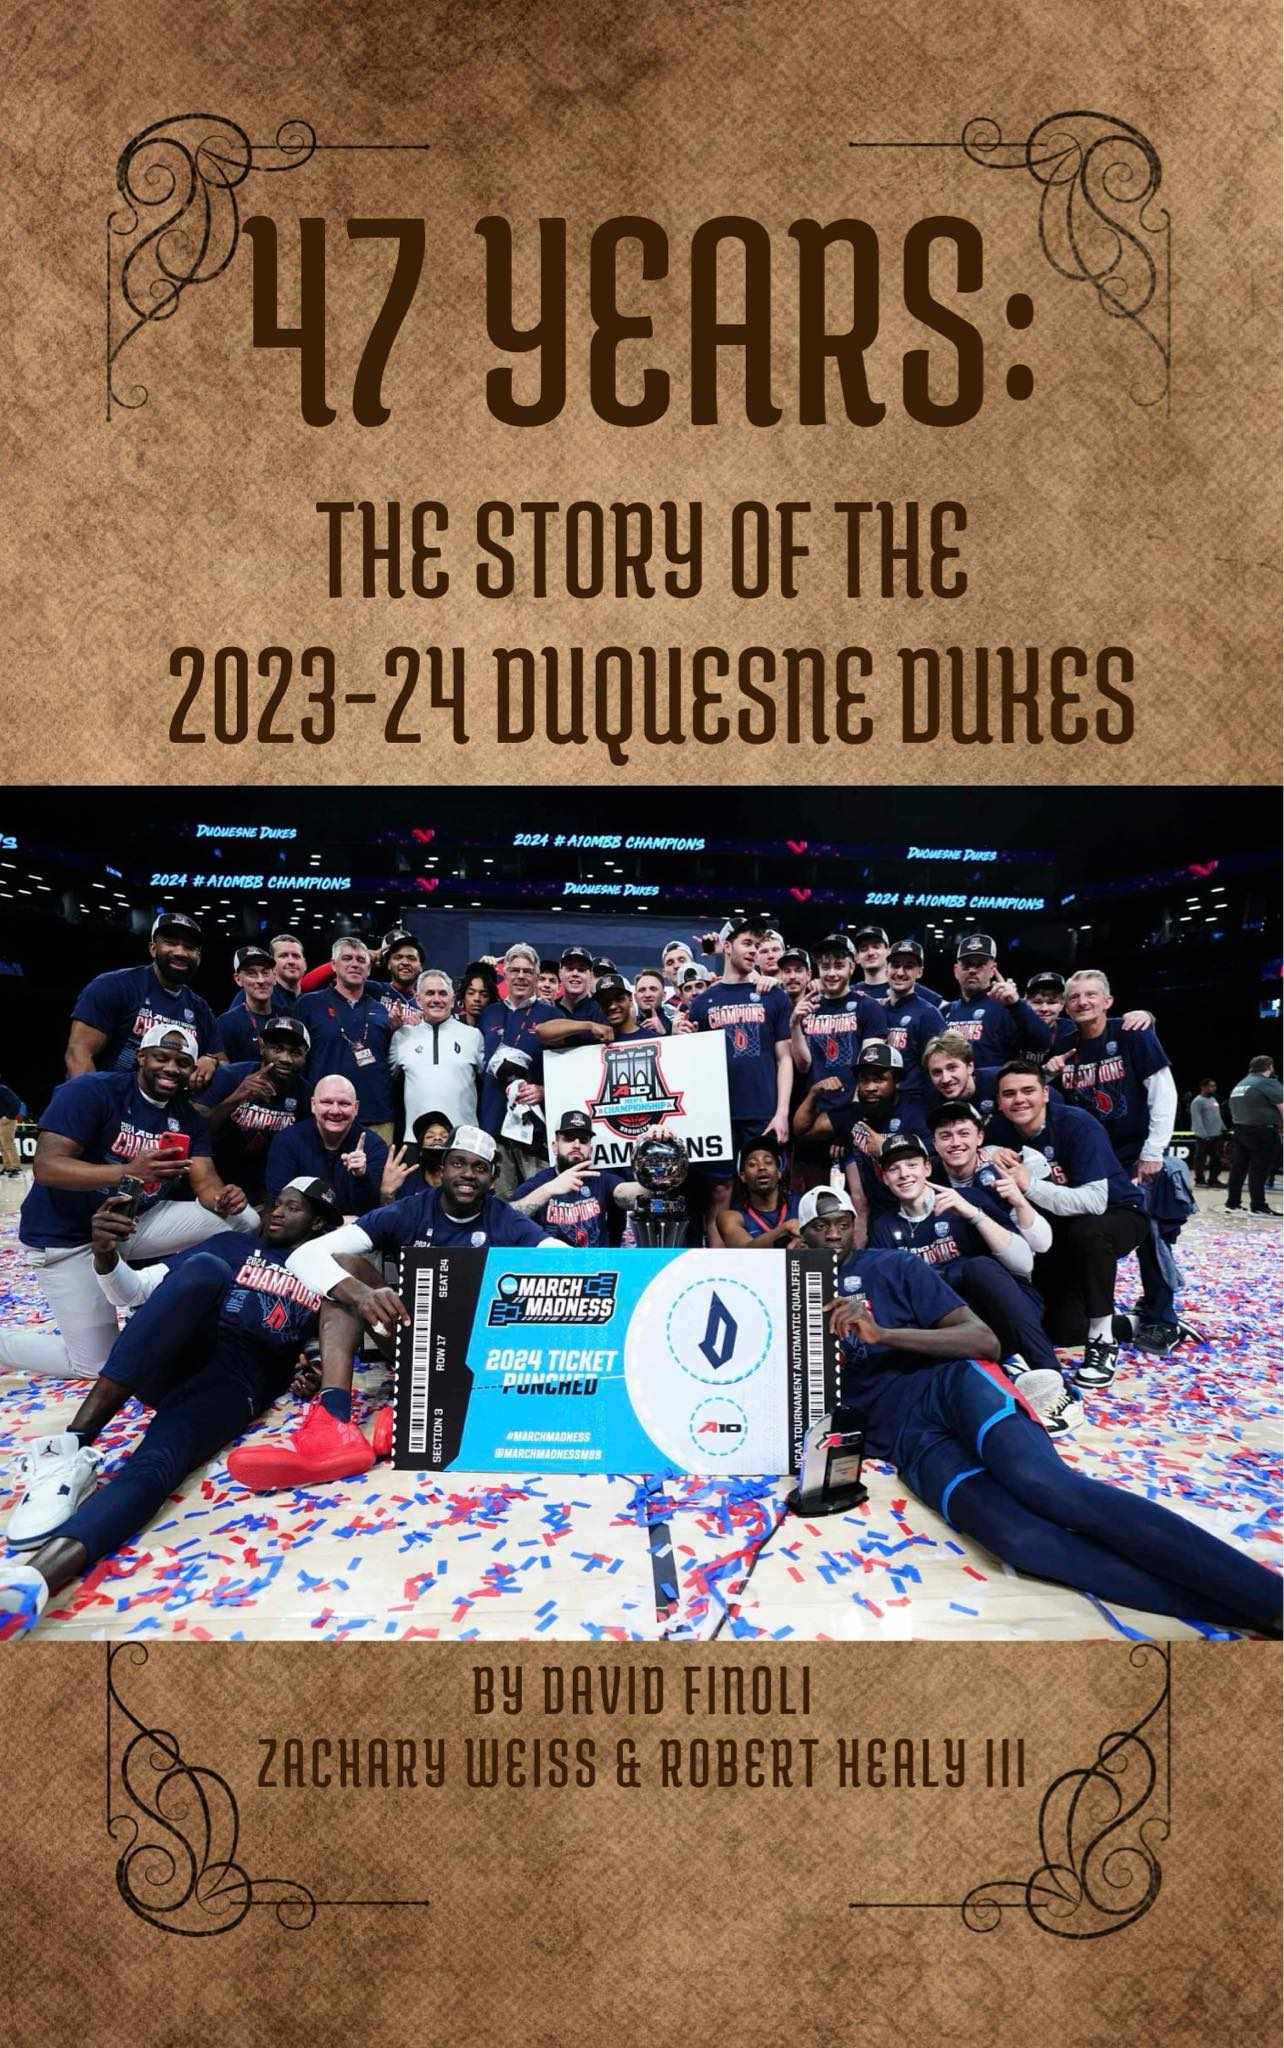 Captivating 2023-24 season for Duquesne men’s basketball to be focus of new book – Pittsburgh Union Progress